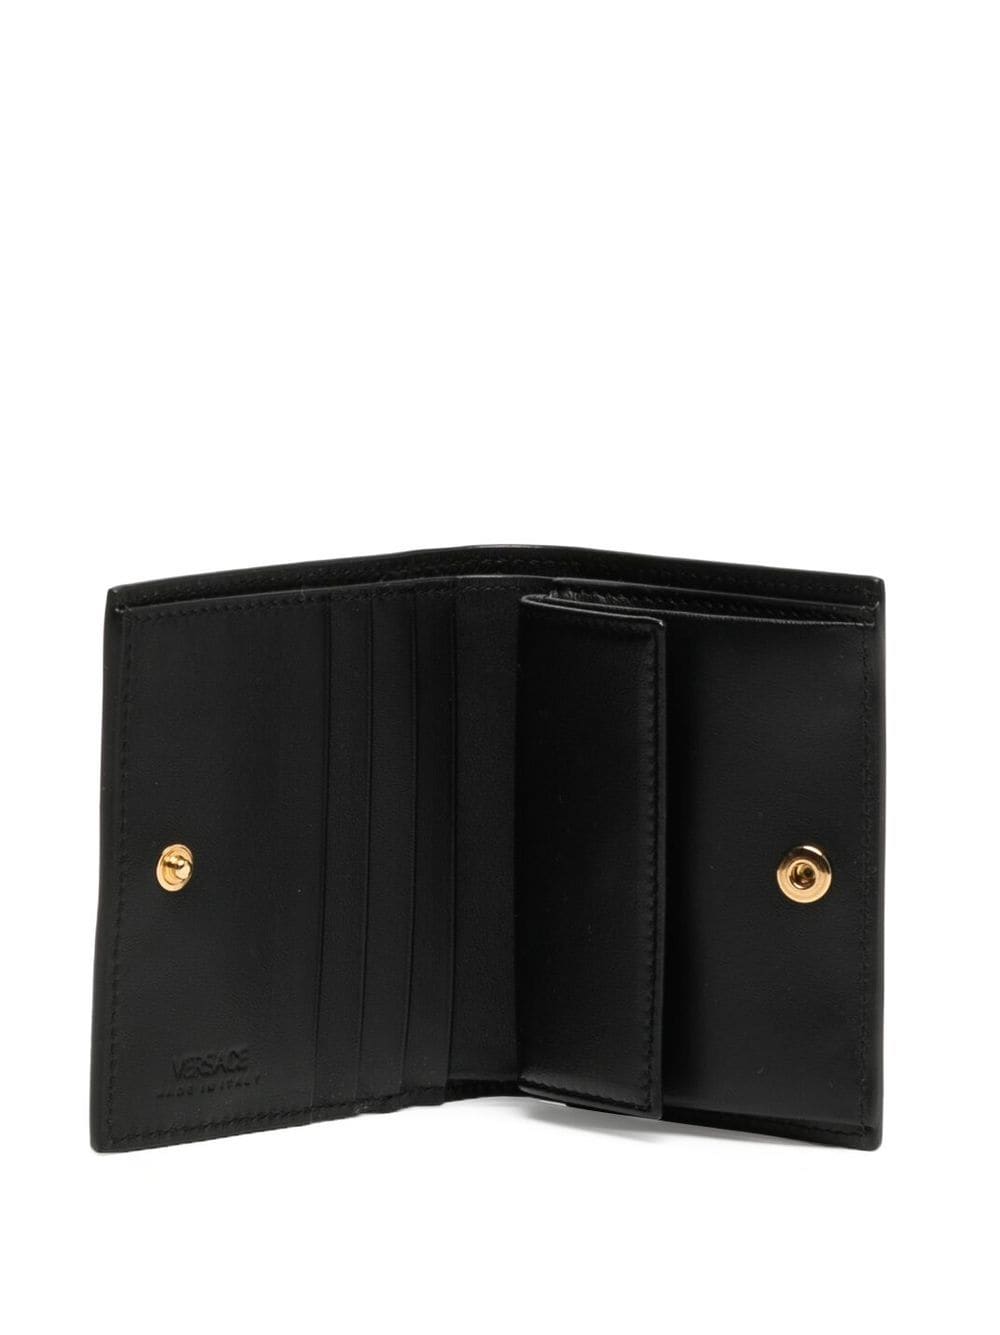 Bi-fold leather wallet from Versace